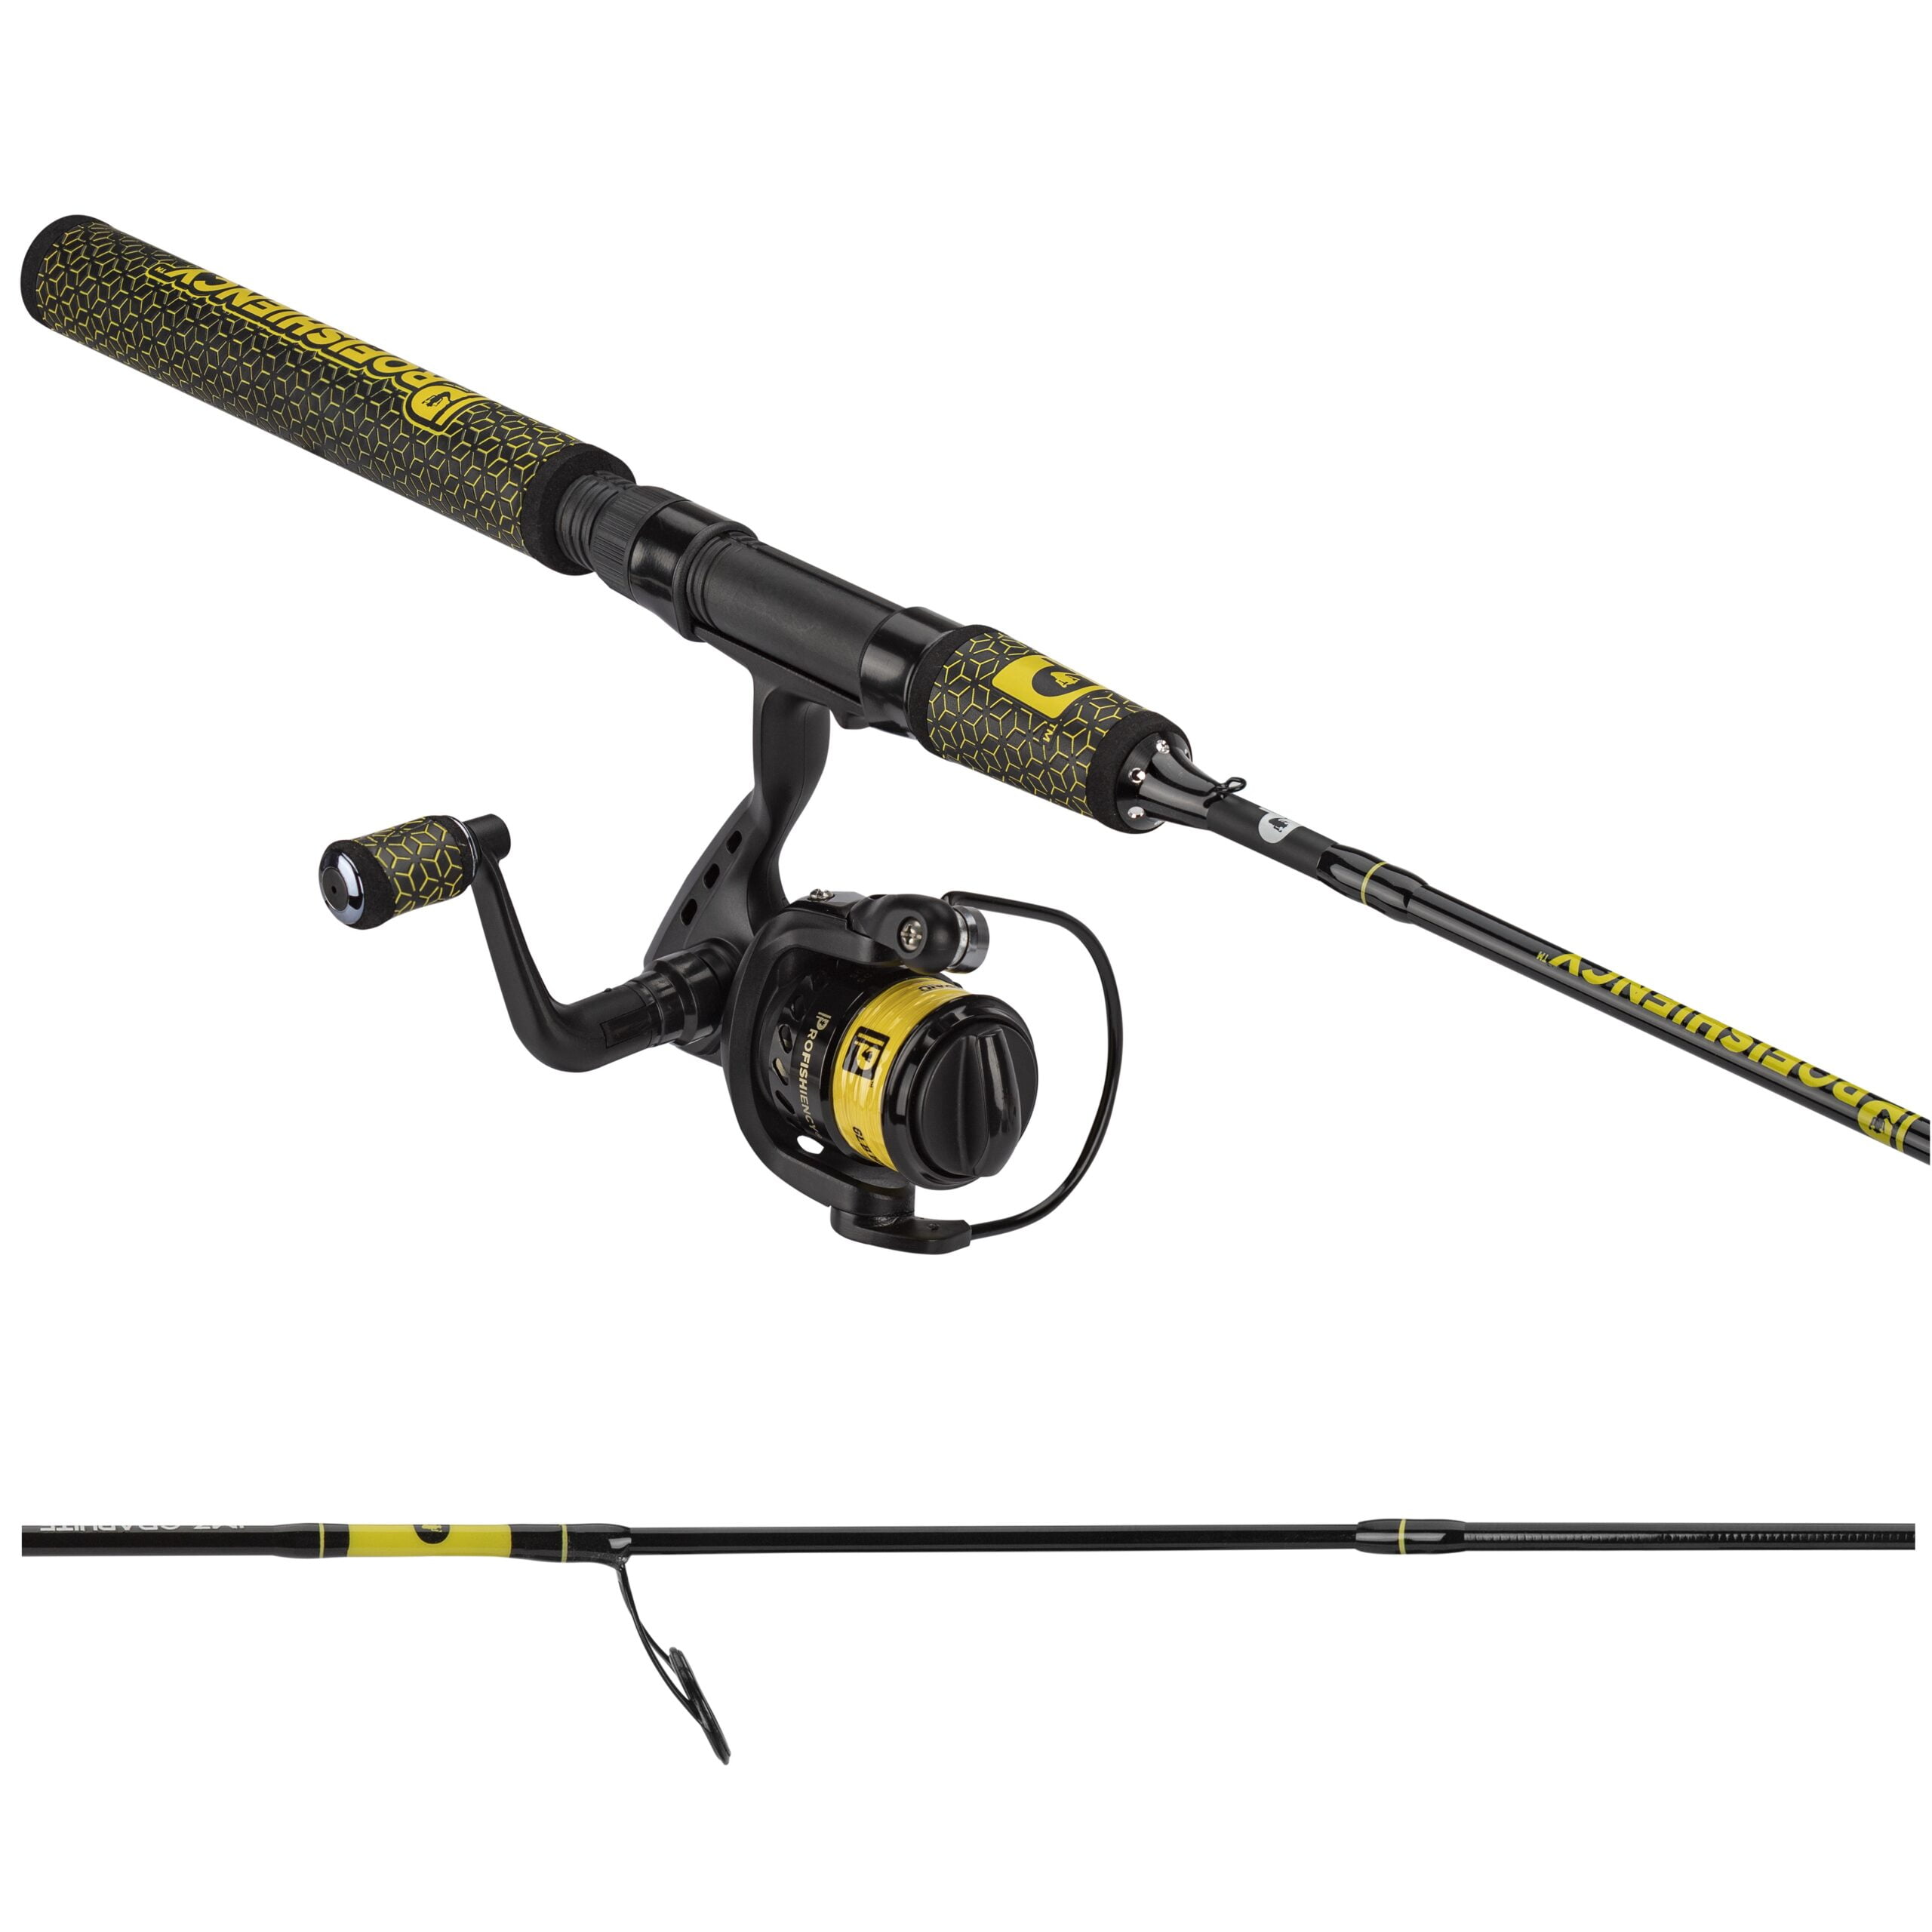 Spinning Best Ultralight Spinning Rod Reel Combo With Telescopic